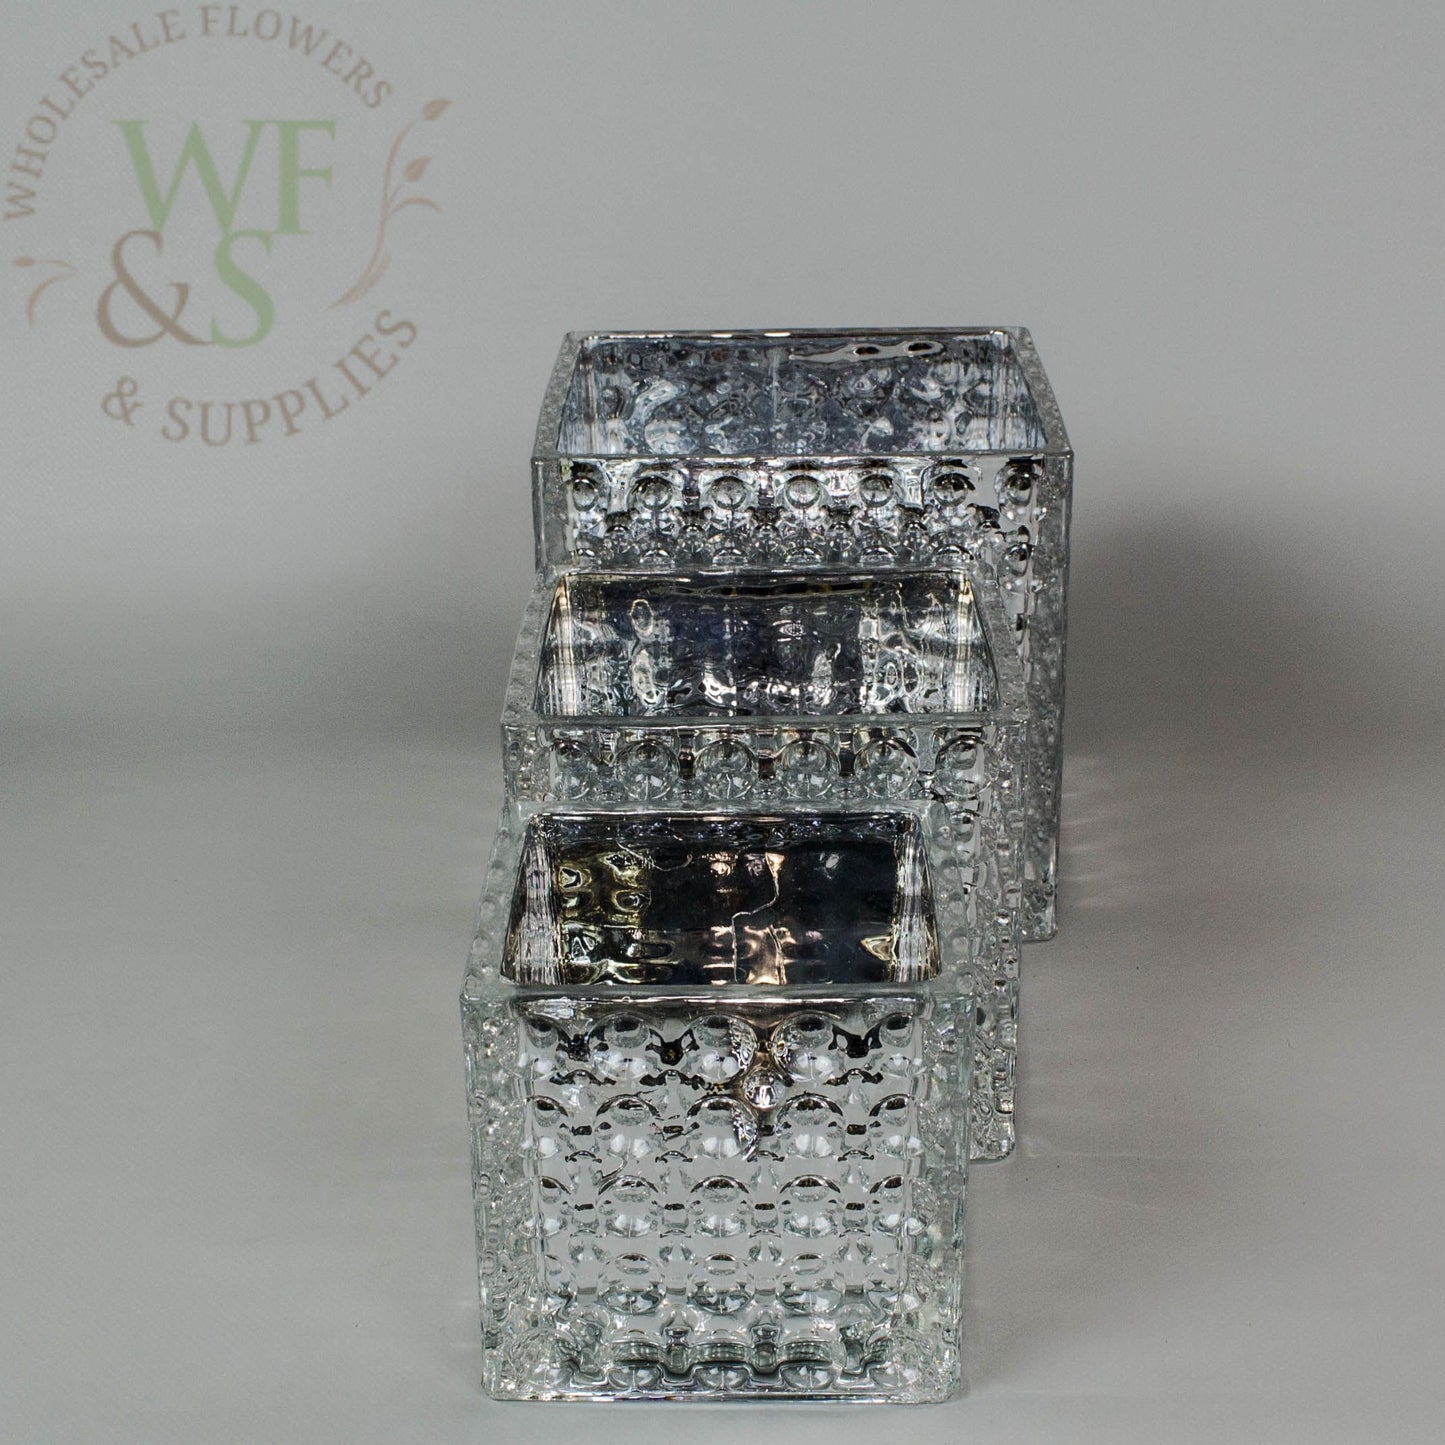 Square Silver Mirrored Glass Cube Vase Dimple Effect 5x5